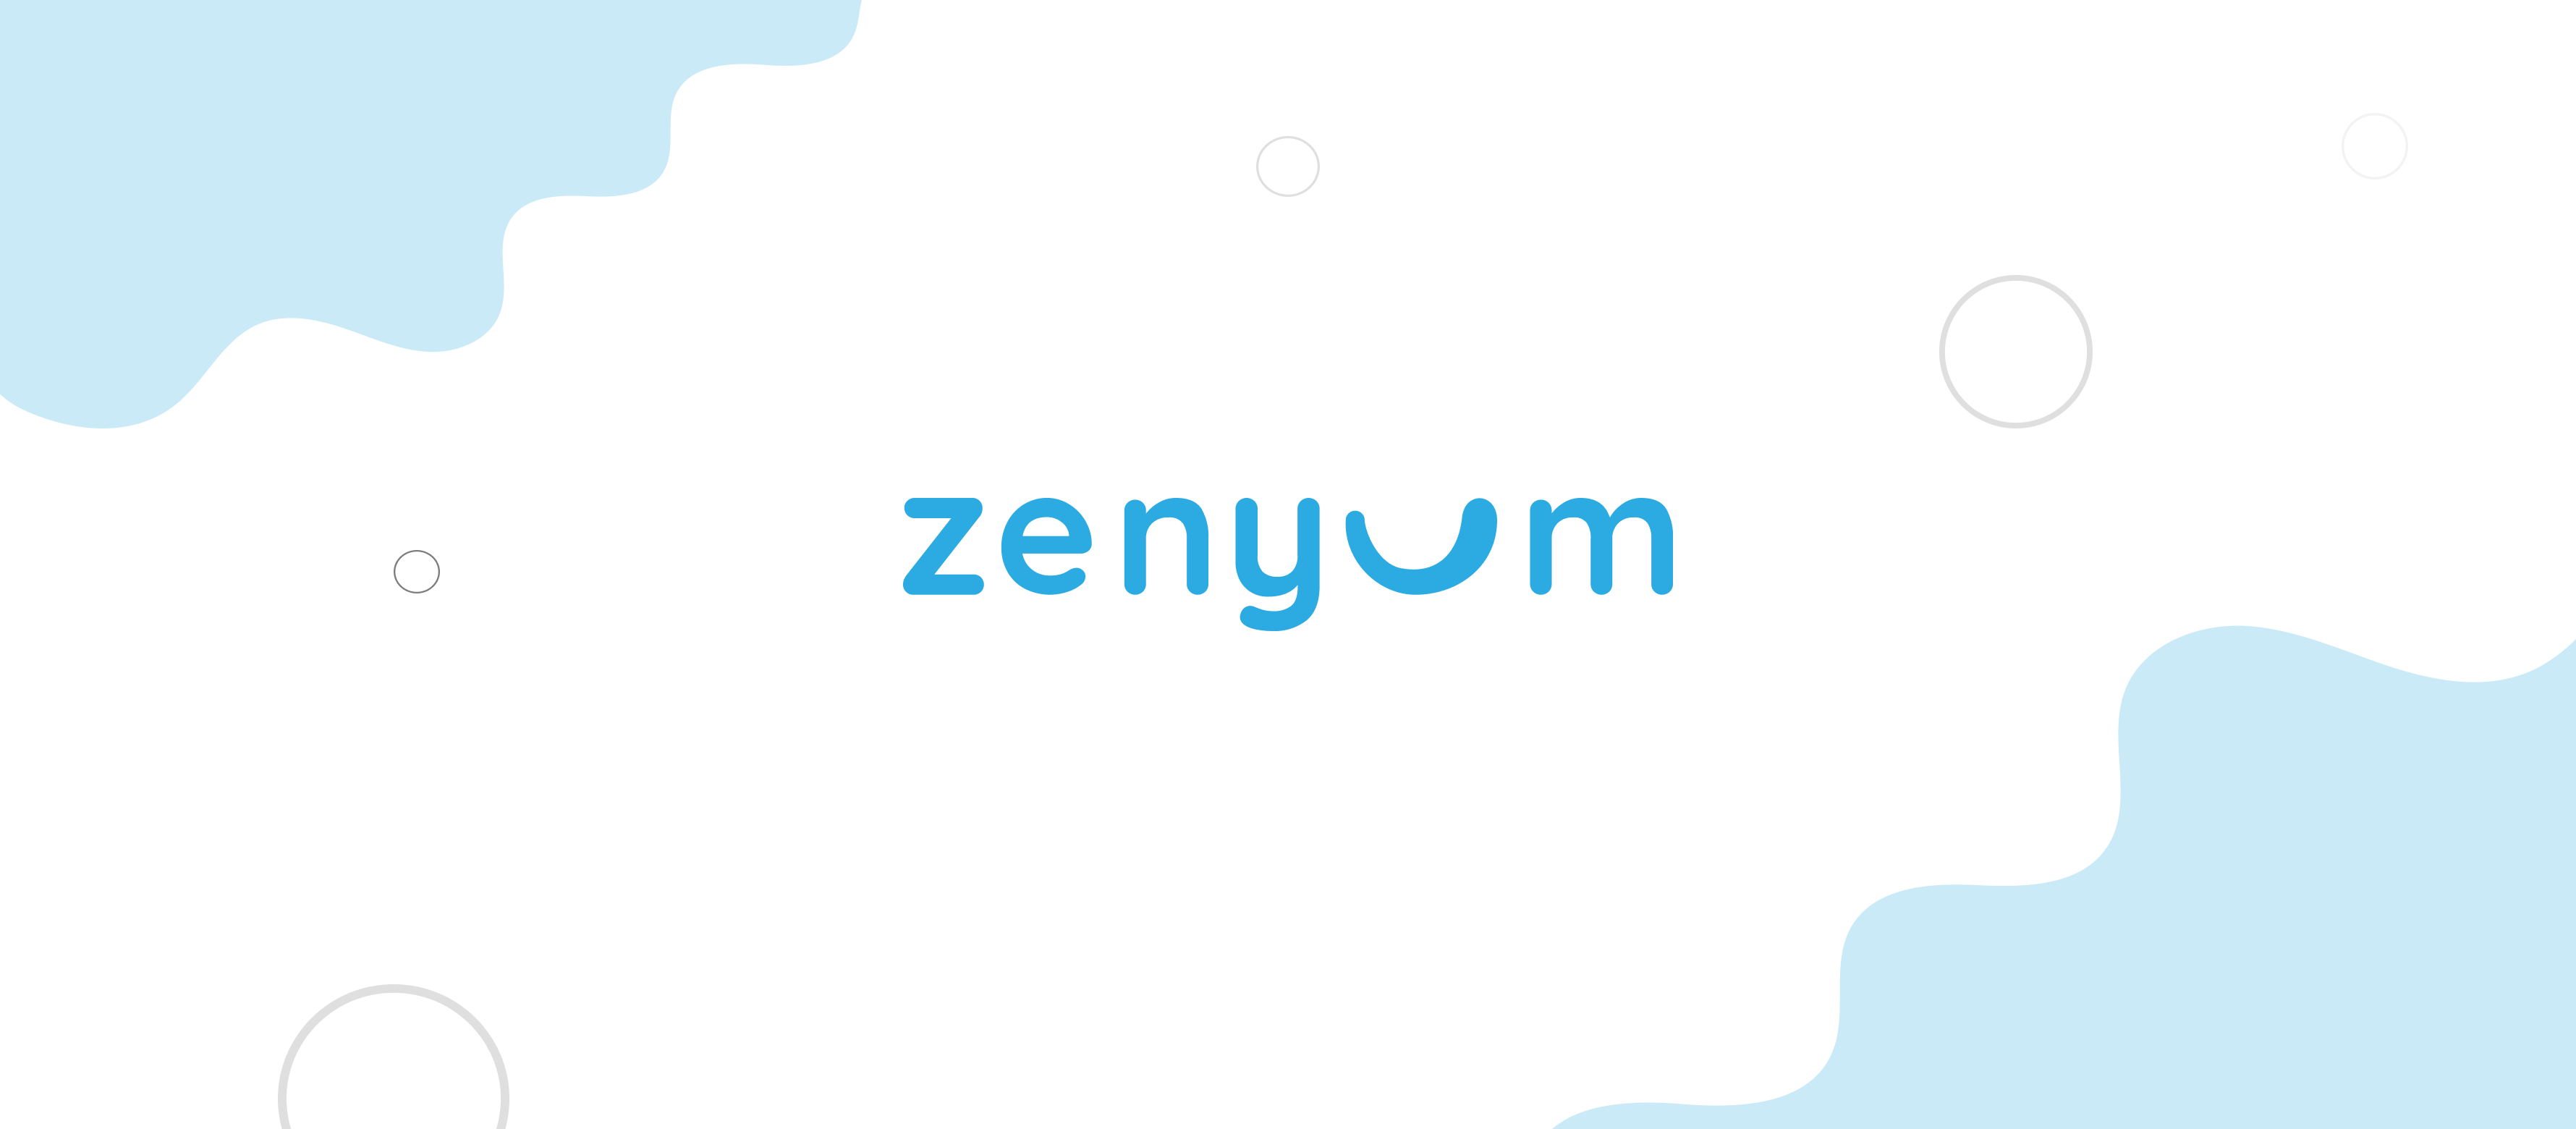 Case Study | Home page design of Zenyum, Asia’s most loved dental brand working on invisible braces & oral care, based out in Singapore